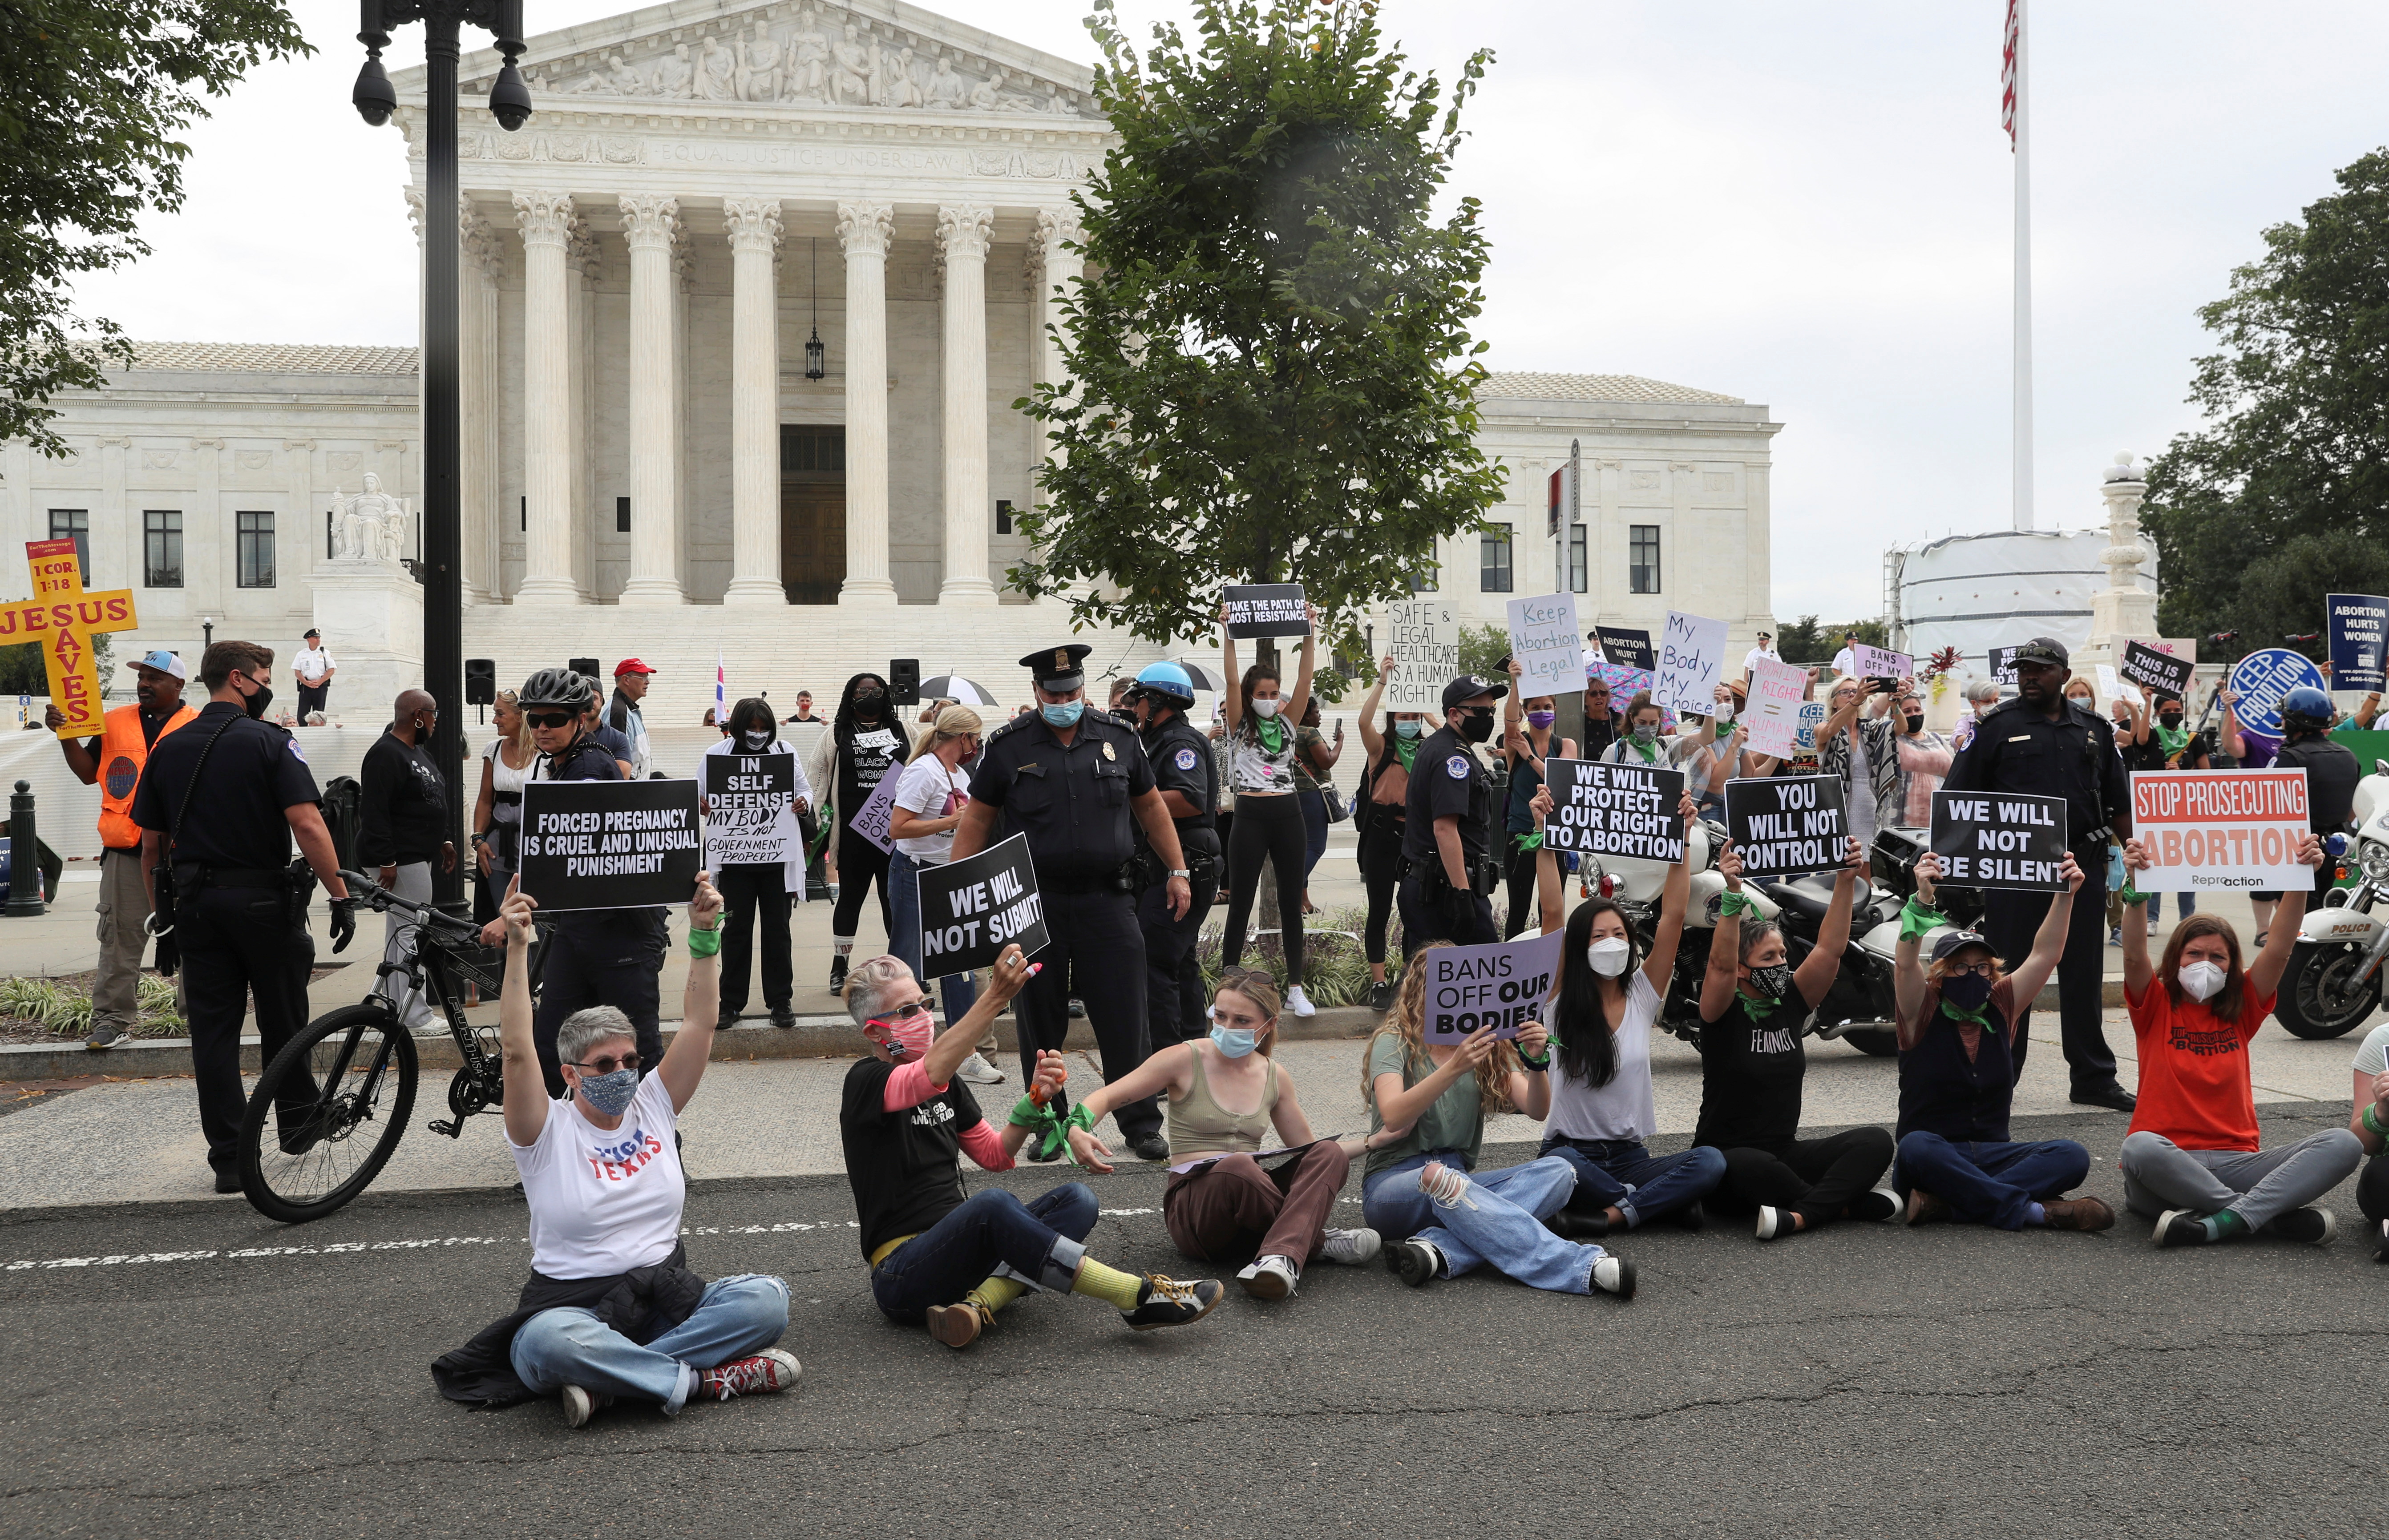 People protest for and against abortion rights outside of the U.S. Supreme Court building in Washington